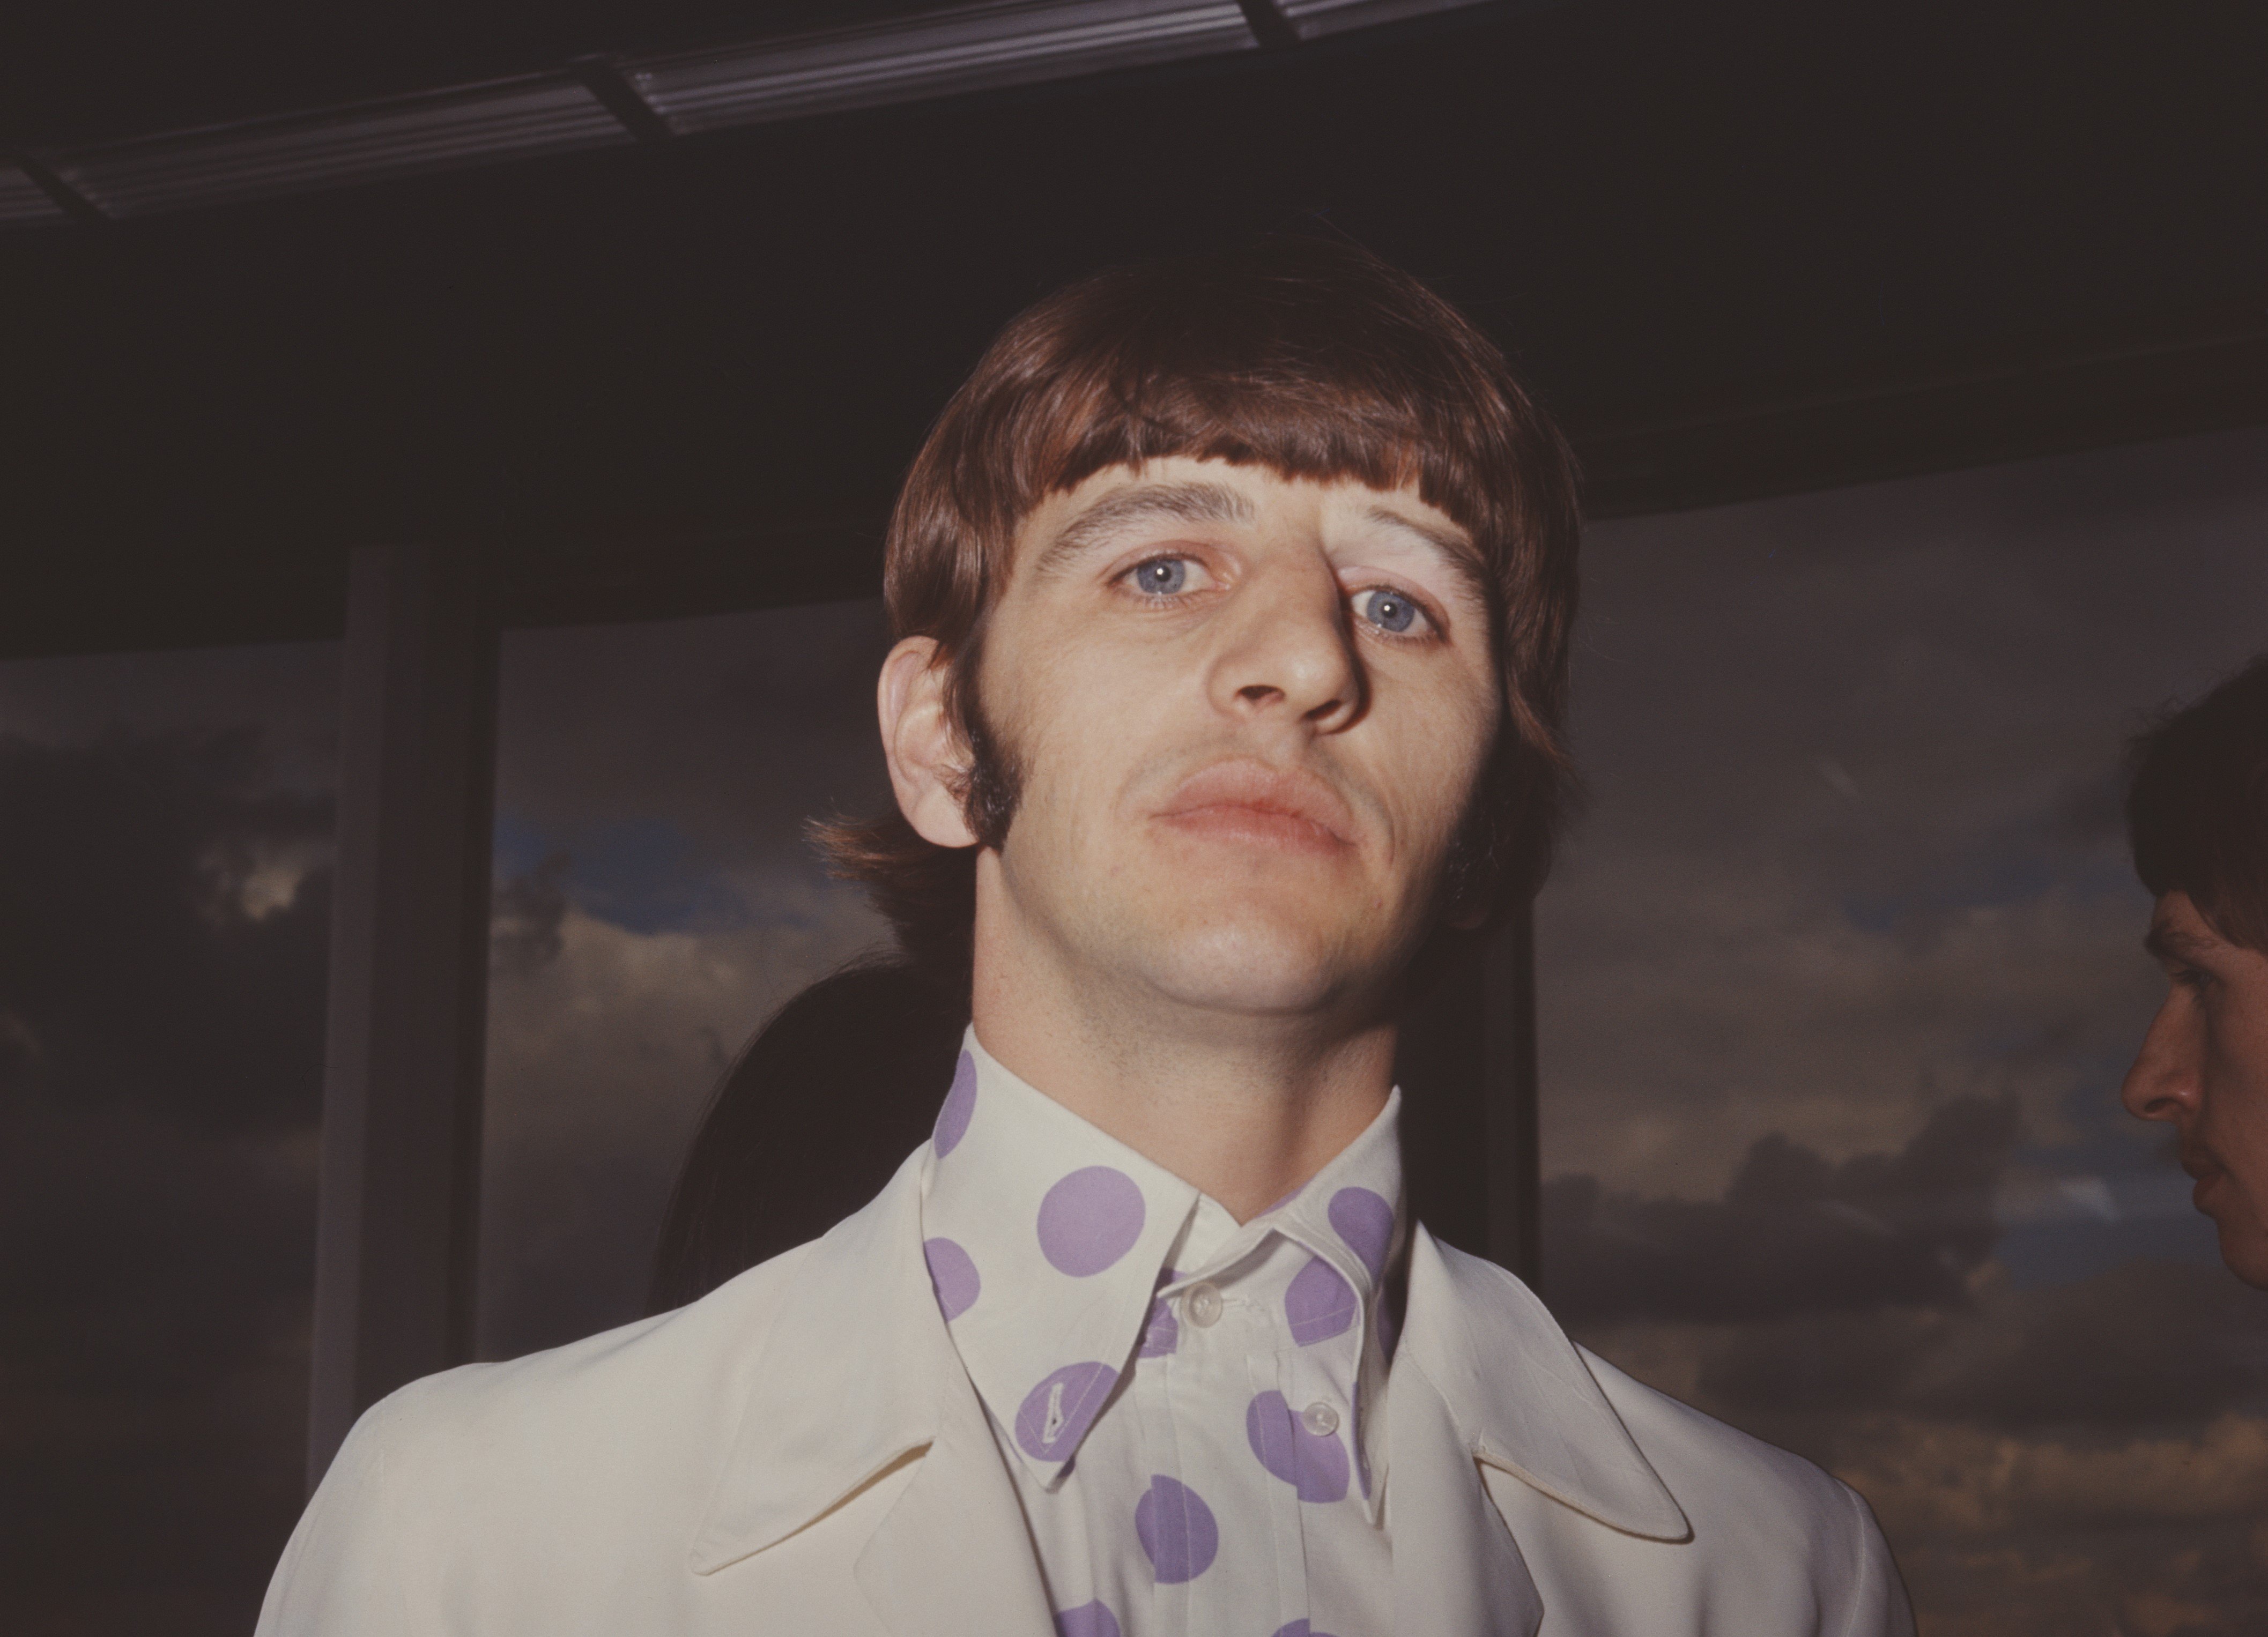 Ringo Starr wears a polka dotted shirt and a white jacket.